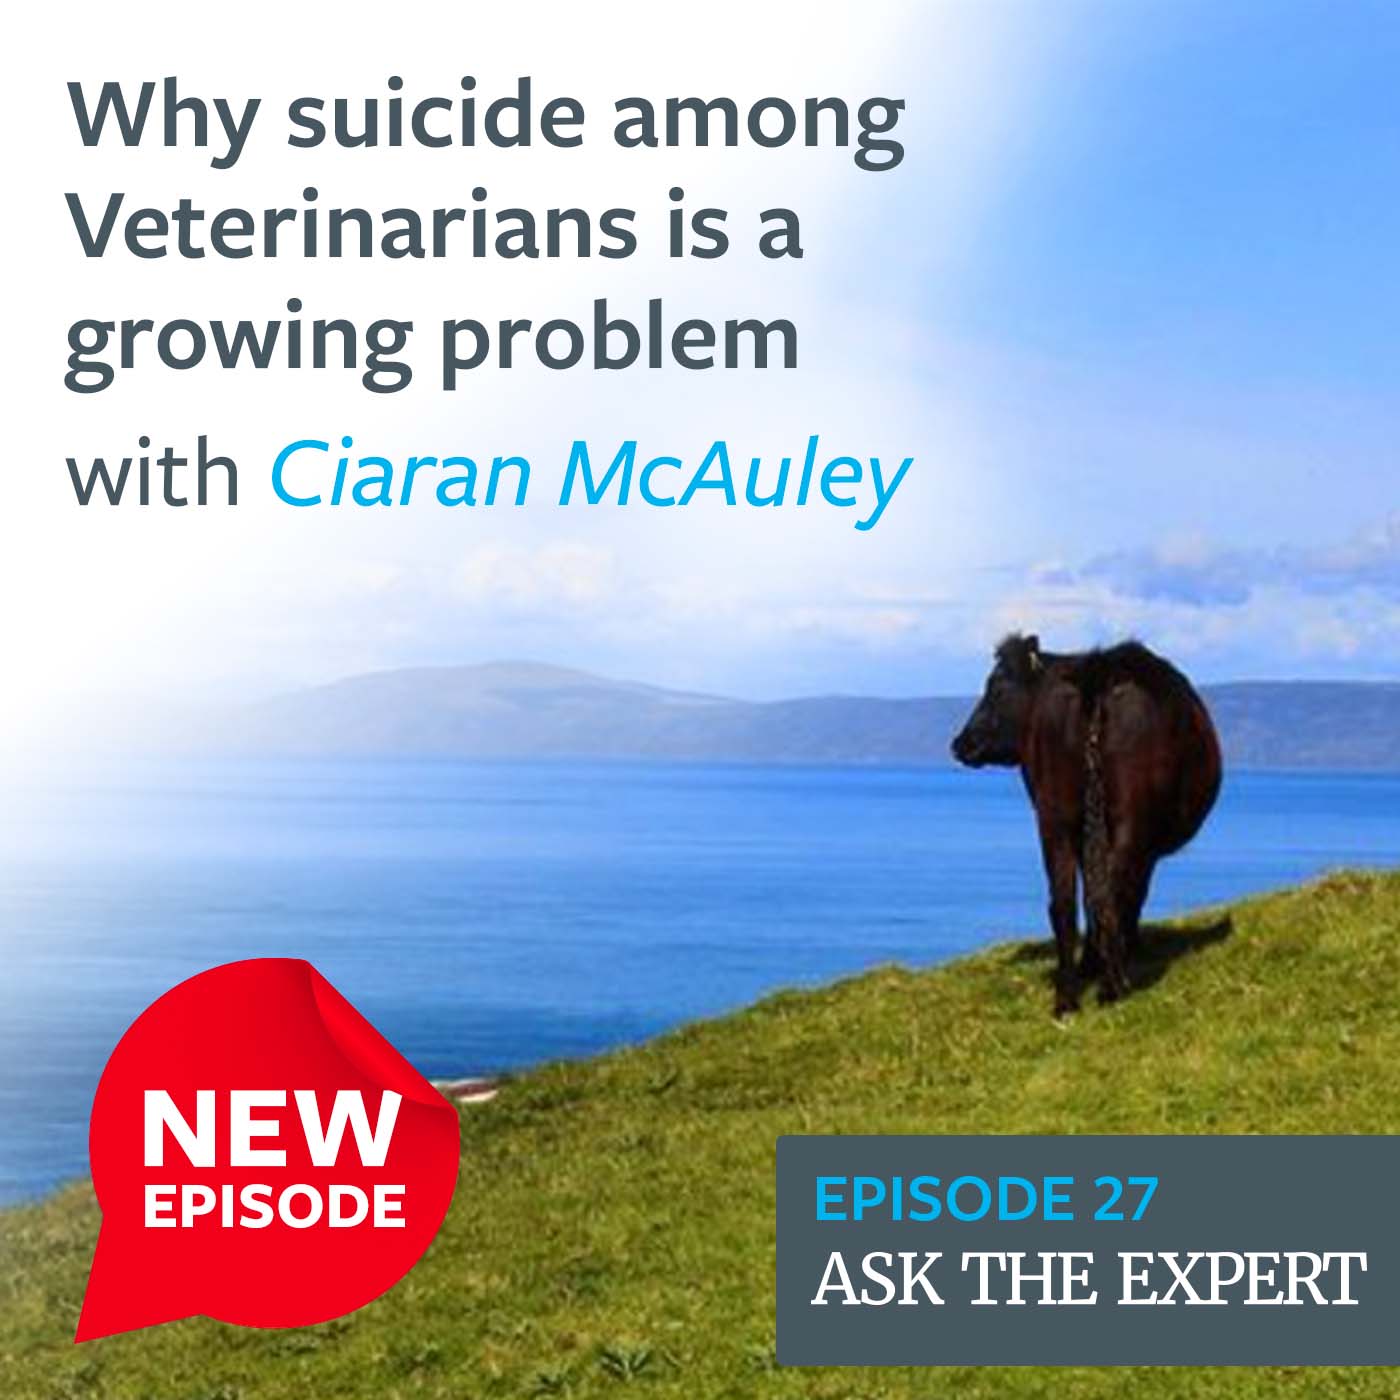 Human Givens Podcast - Episode 27: Why suicide among Veterinarians is a growing problem with Ciaran McAuley